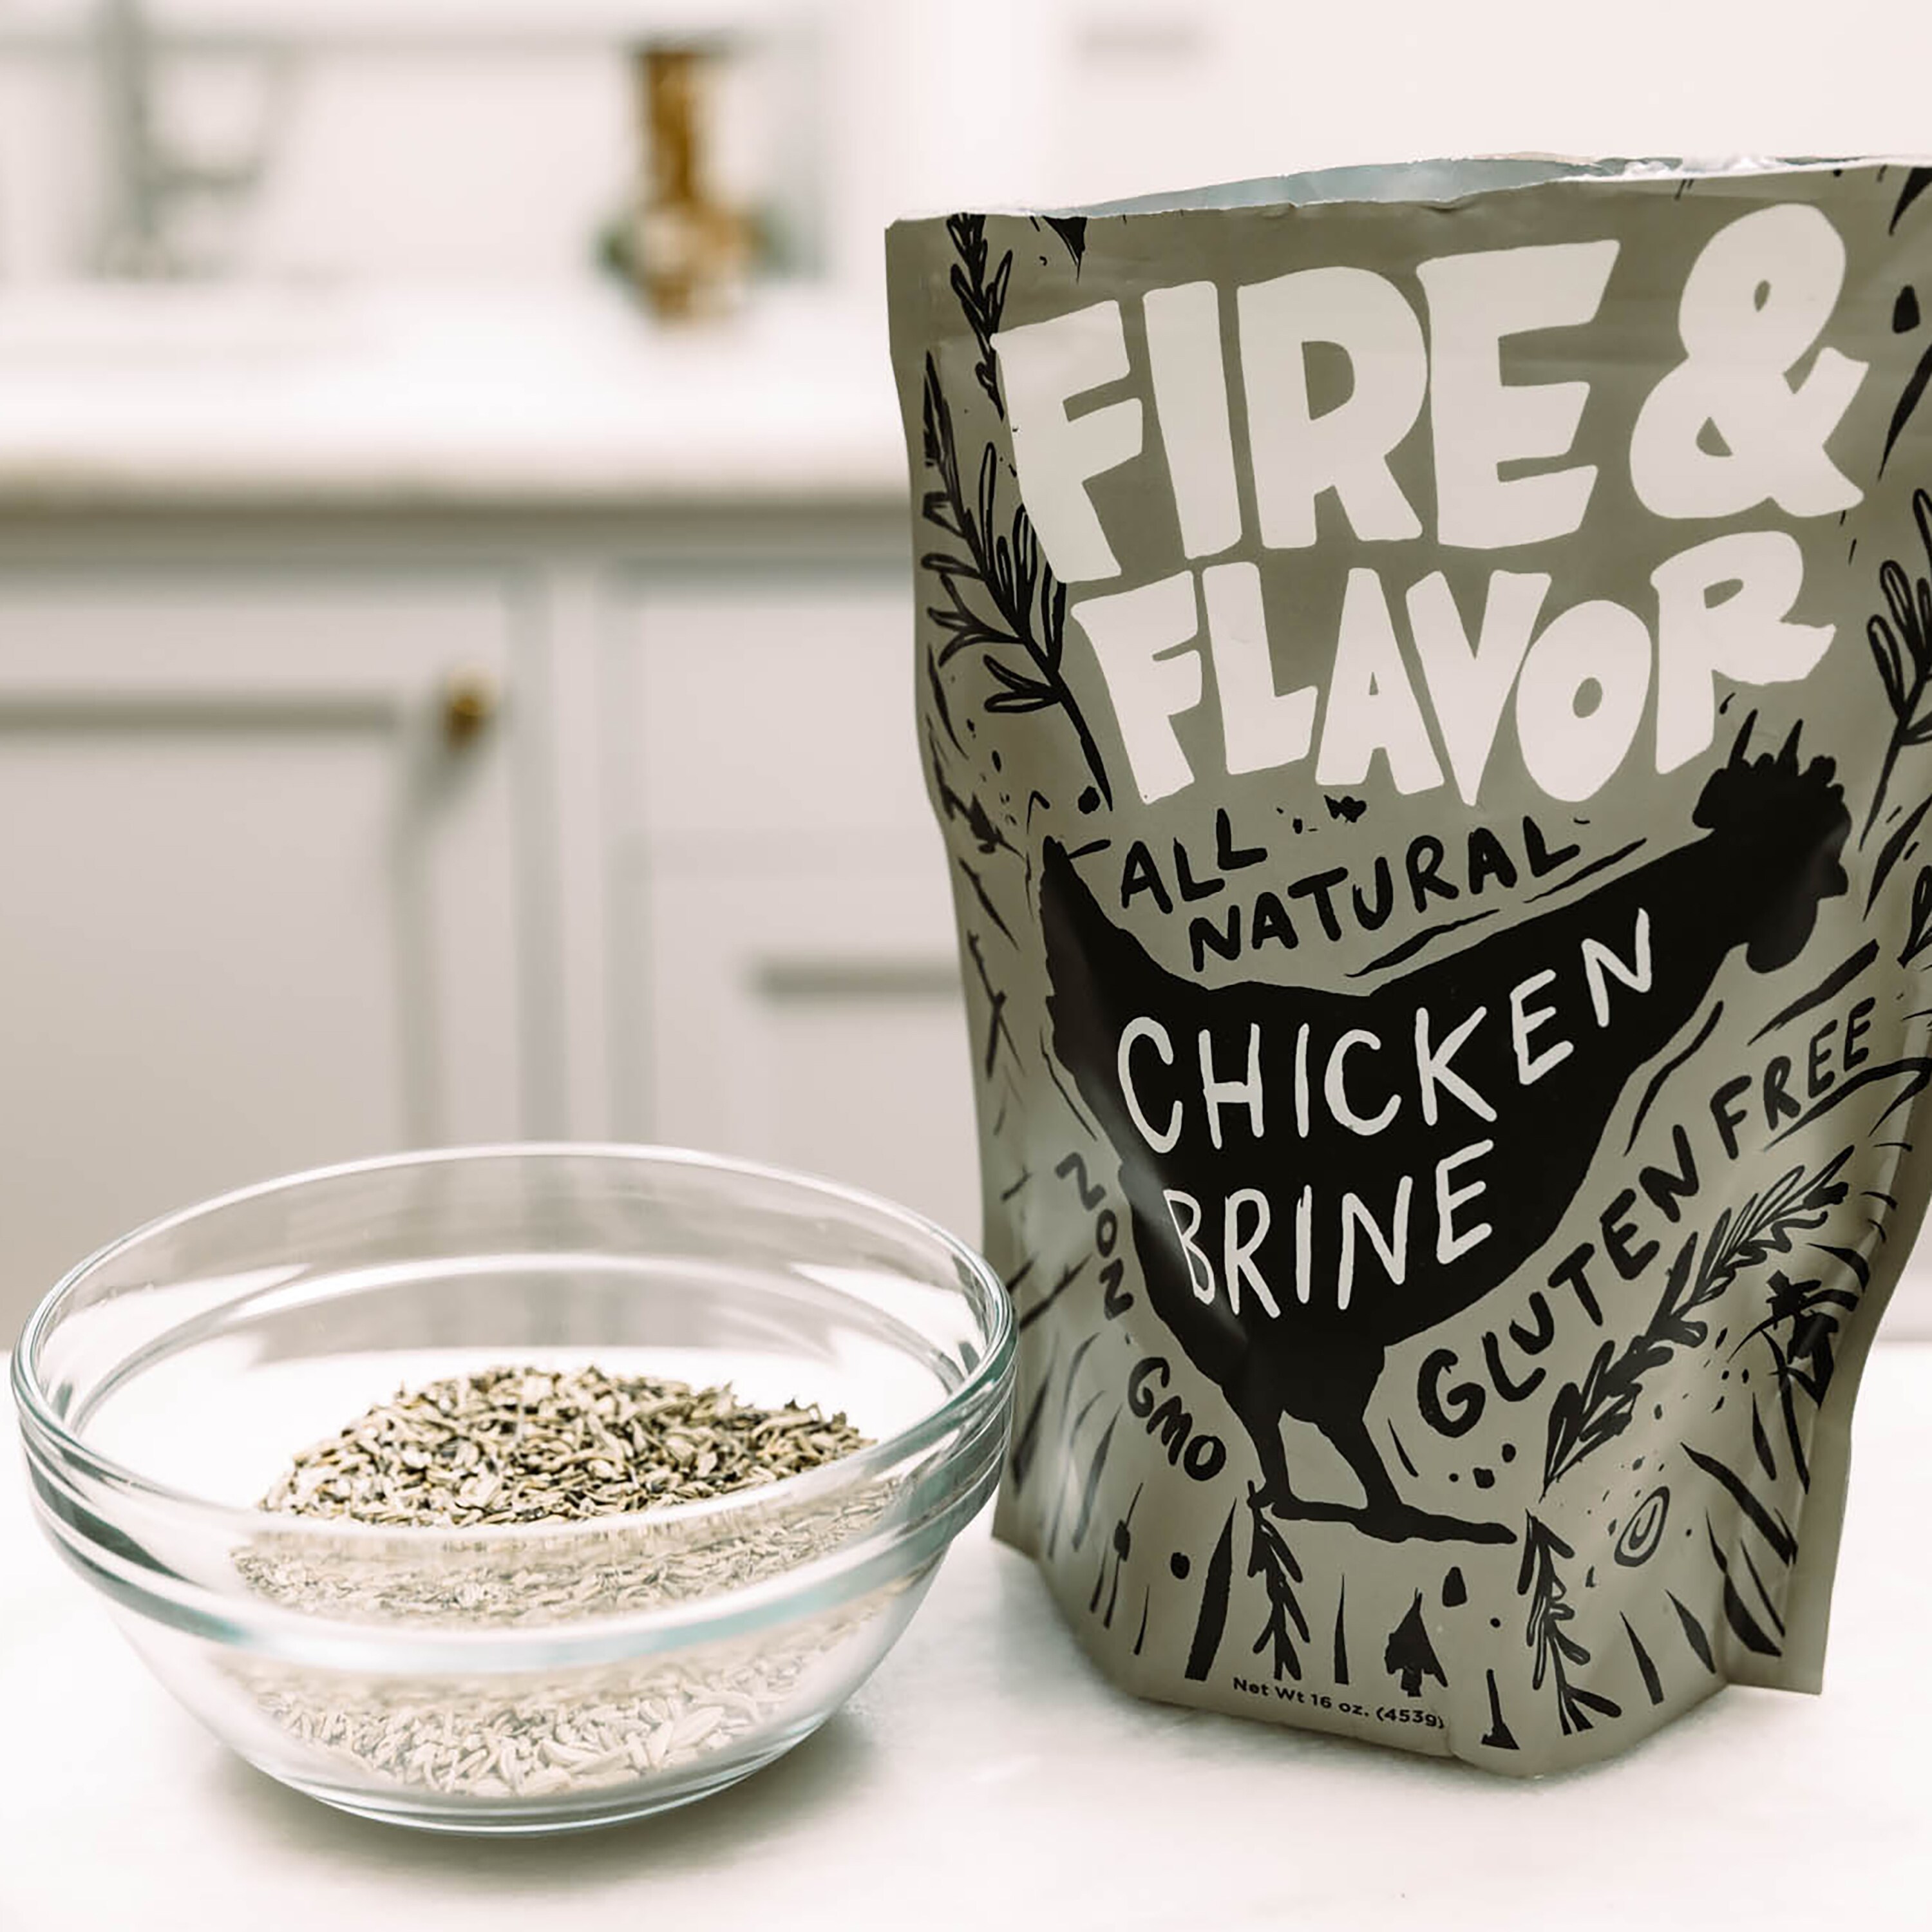 Fire and Flavor All-Natural Lemon Pepper Brine Kit, Includes